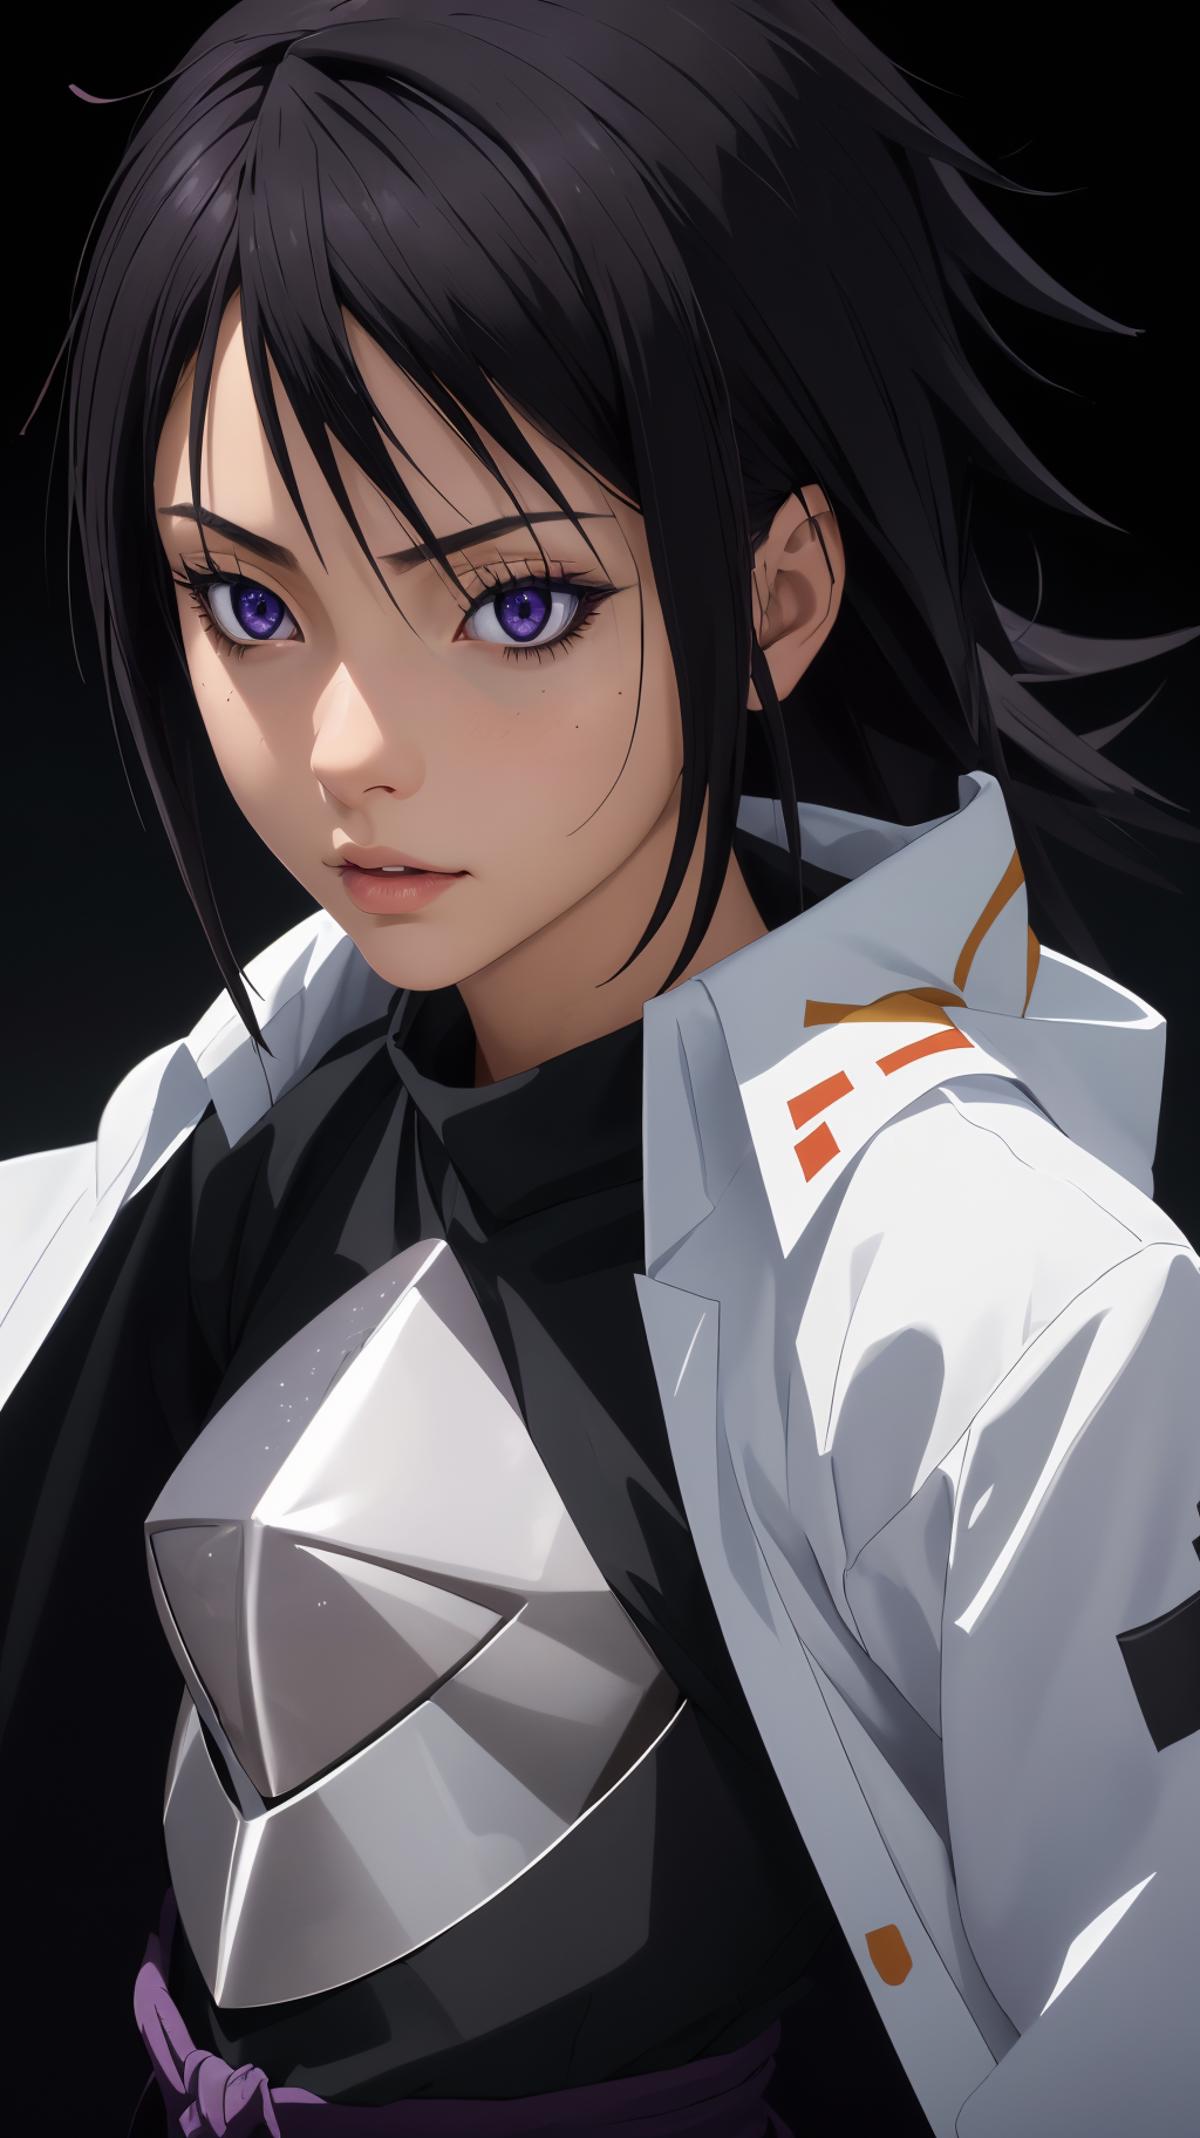 Anime character wearing a black shirt and white jacket with purple eyes.